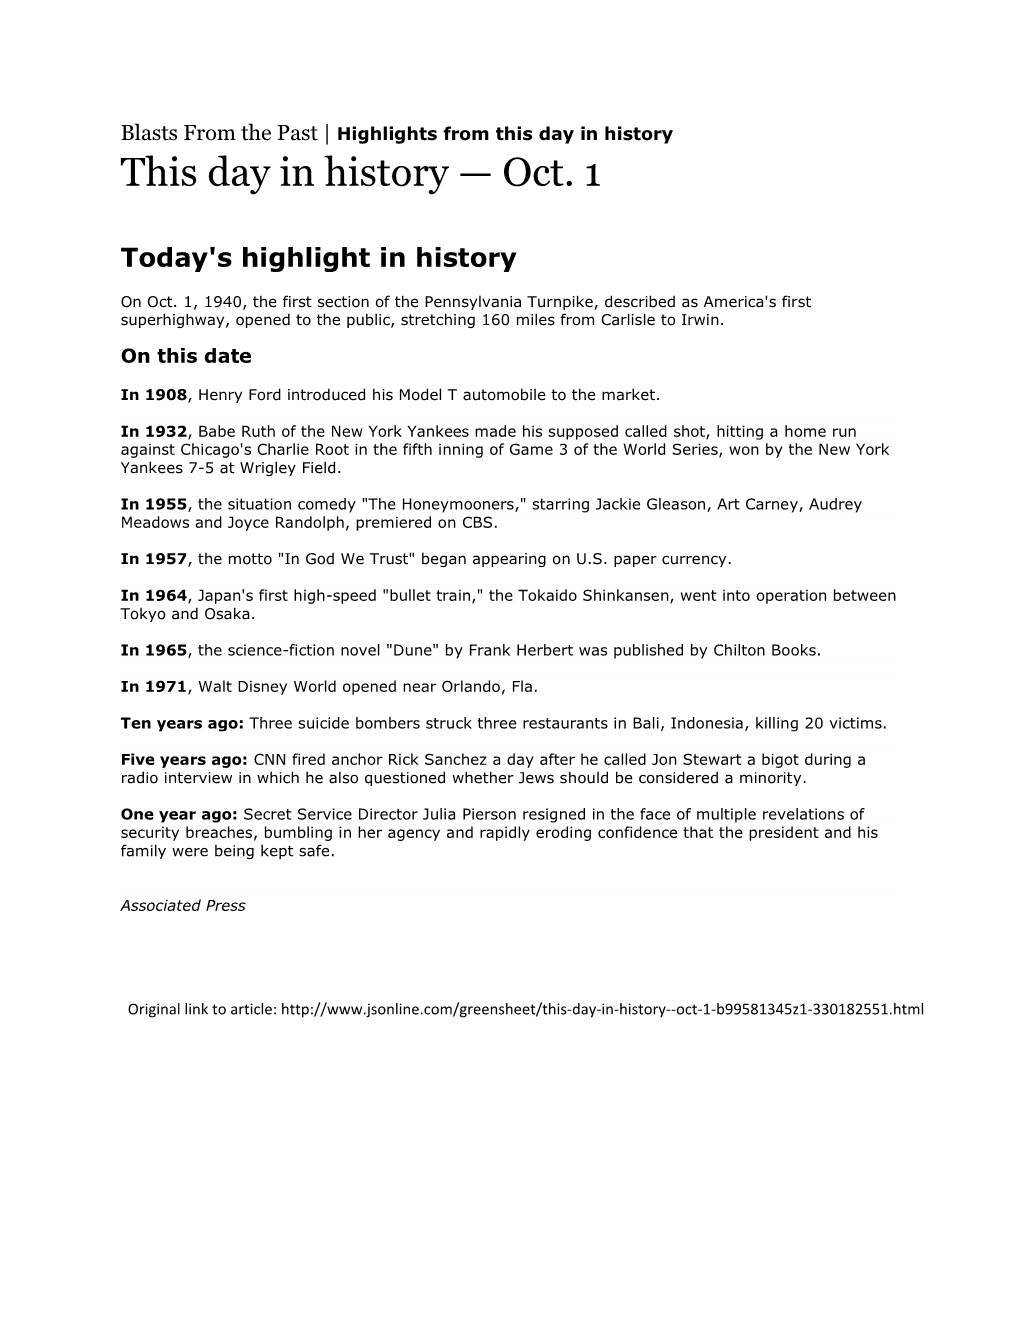 This Day in History — Oct. 1